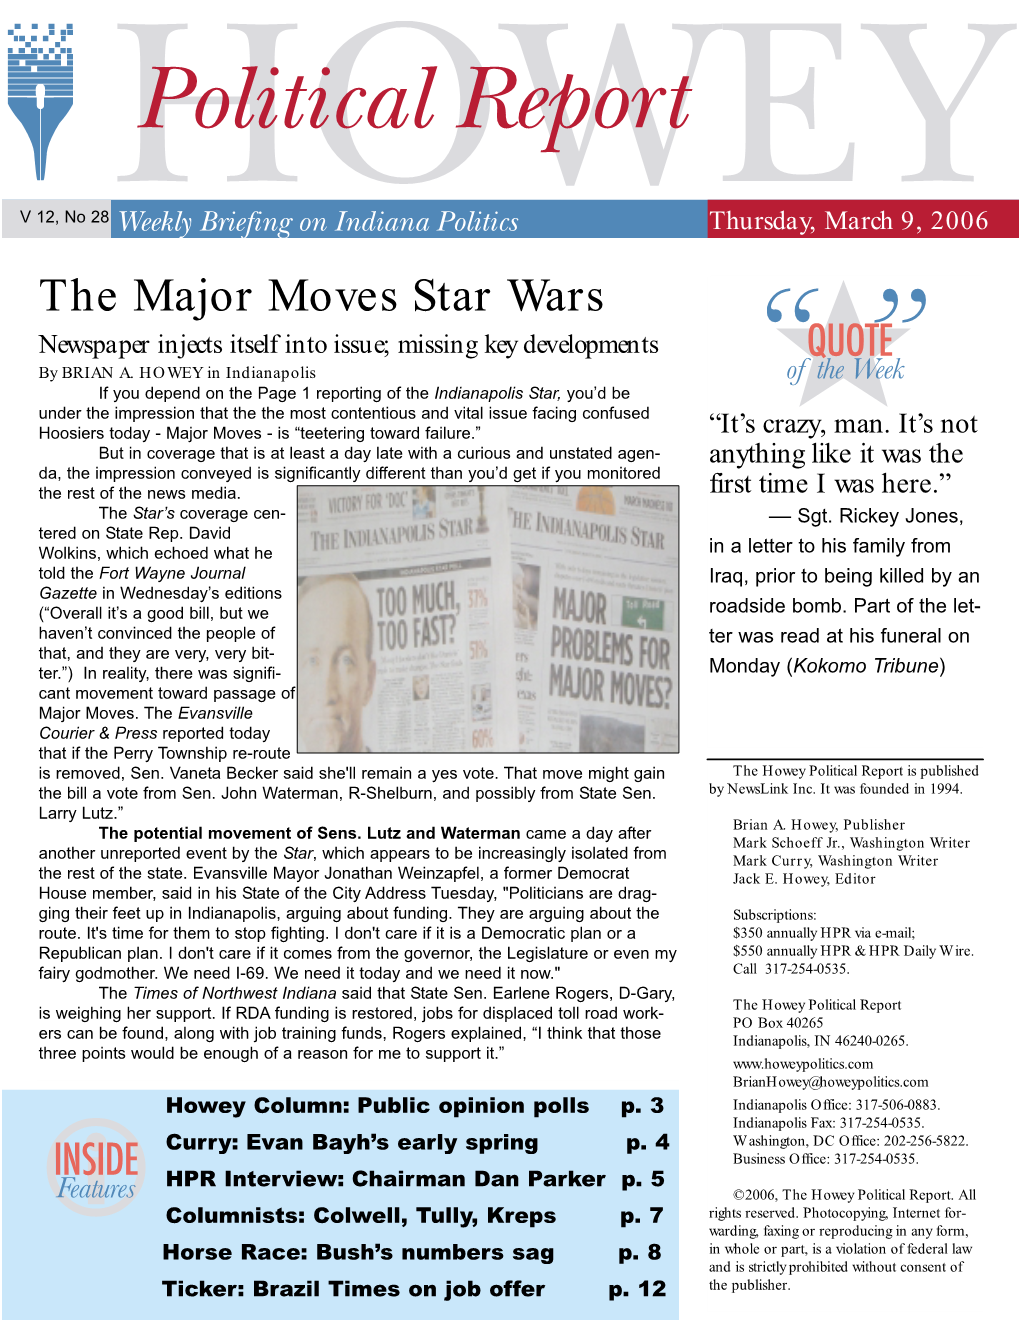 The Major Moves Star Wars Newspaper Injects Itself Into Issue; Missing Key Developments by BRIAN A